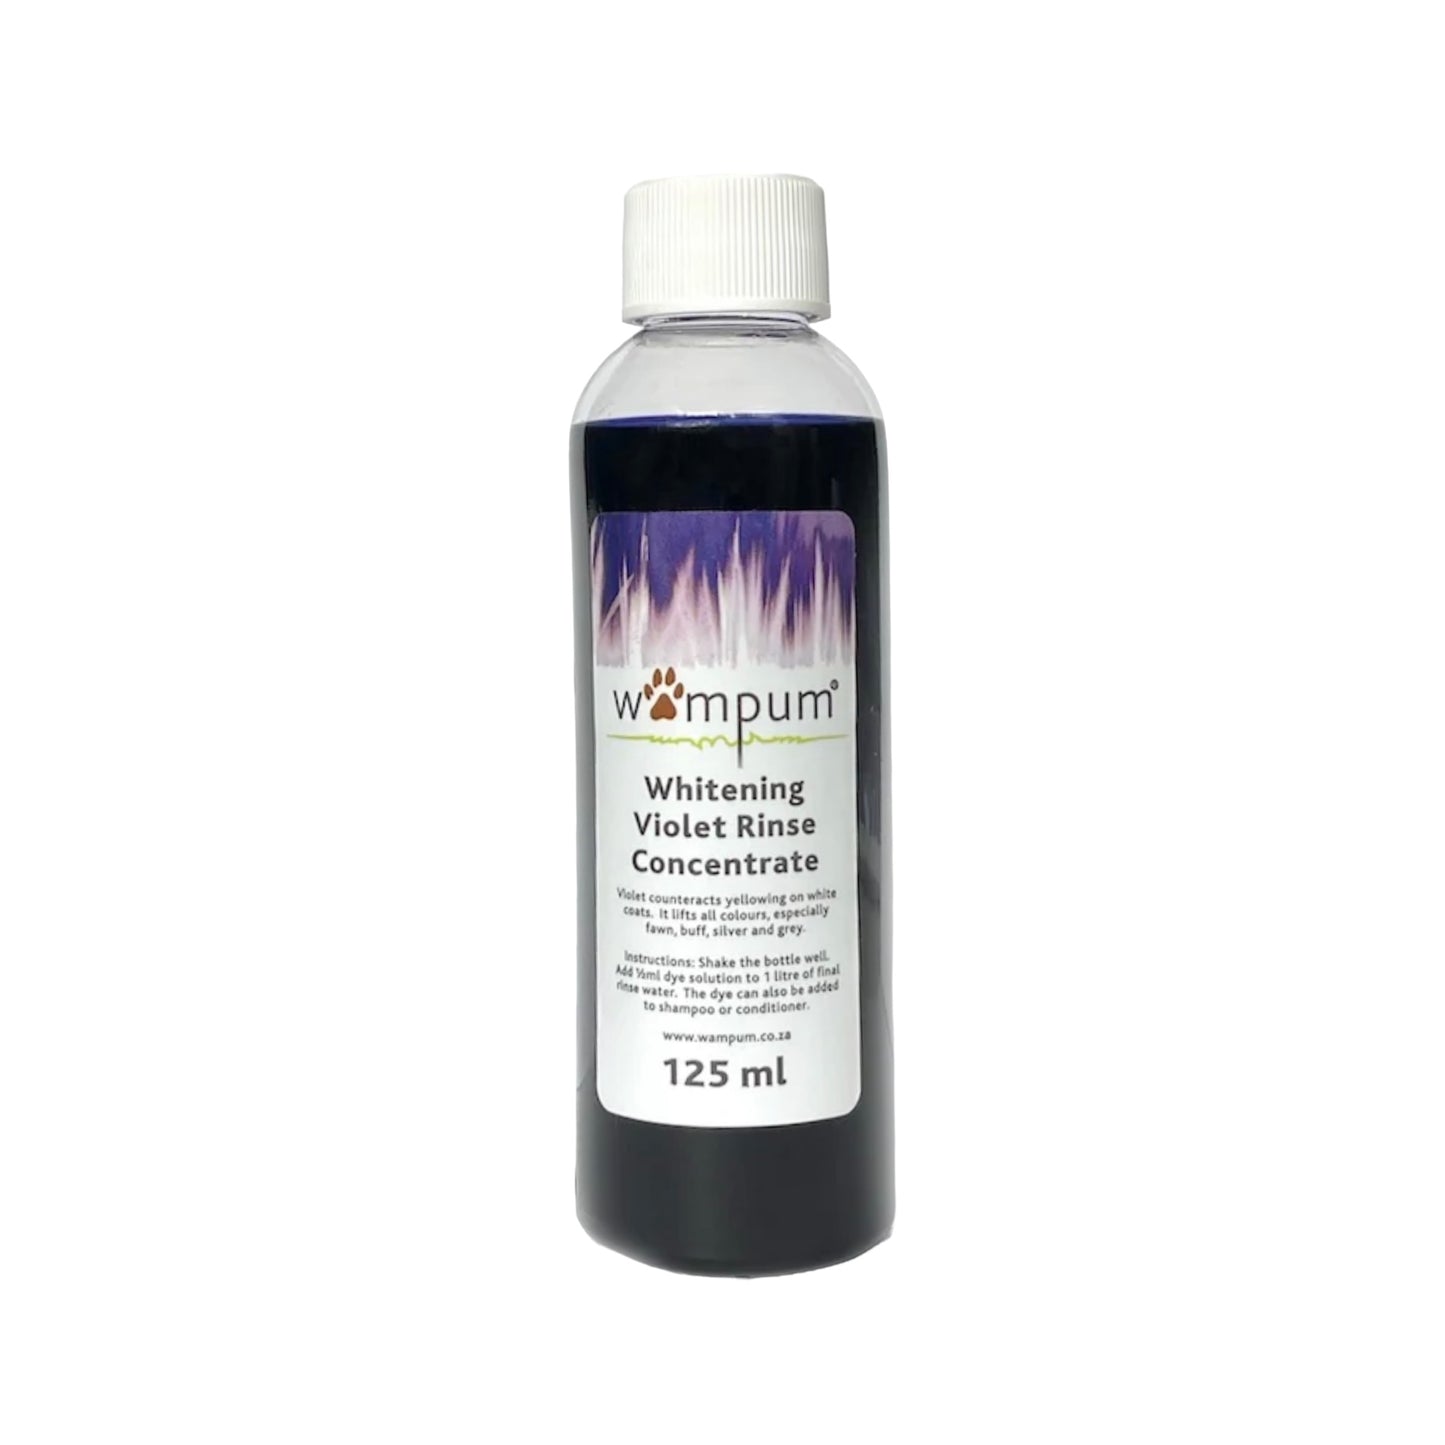 Wampum Violet Rinse Concentrate 125ml